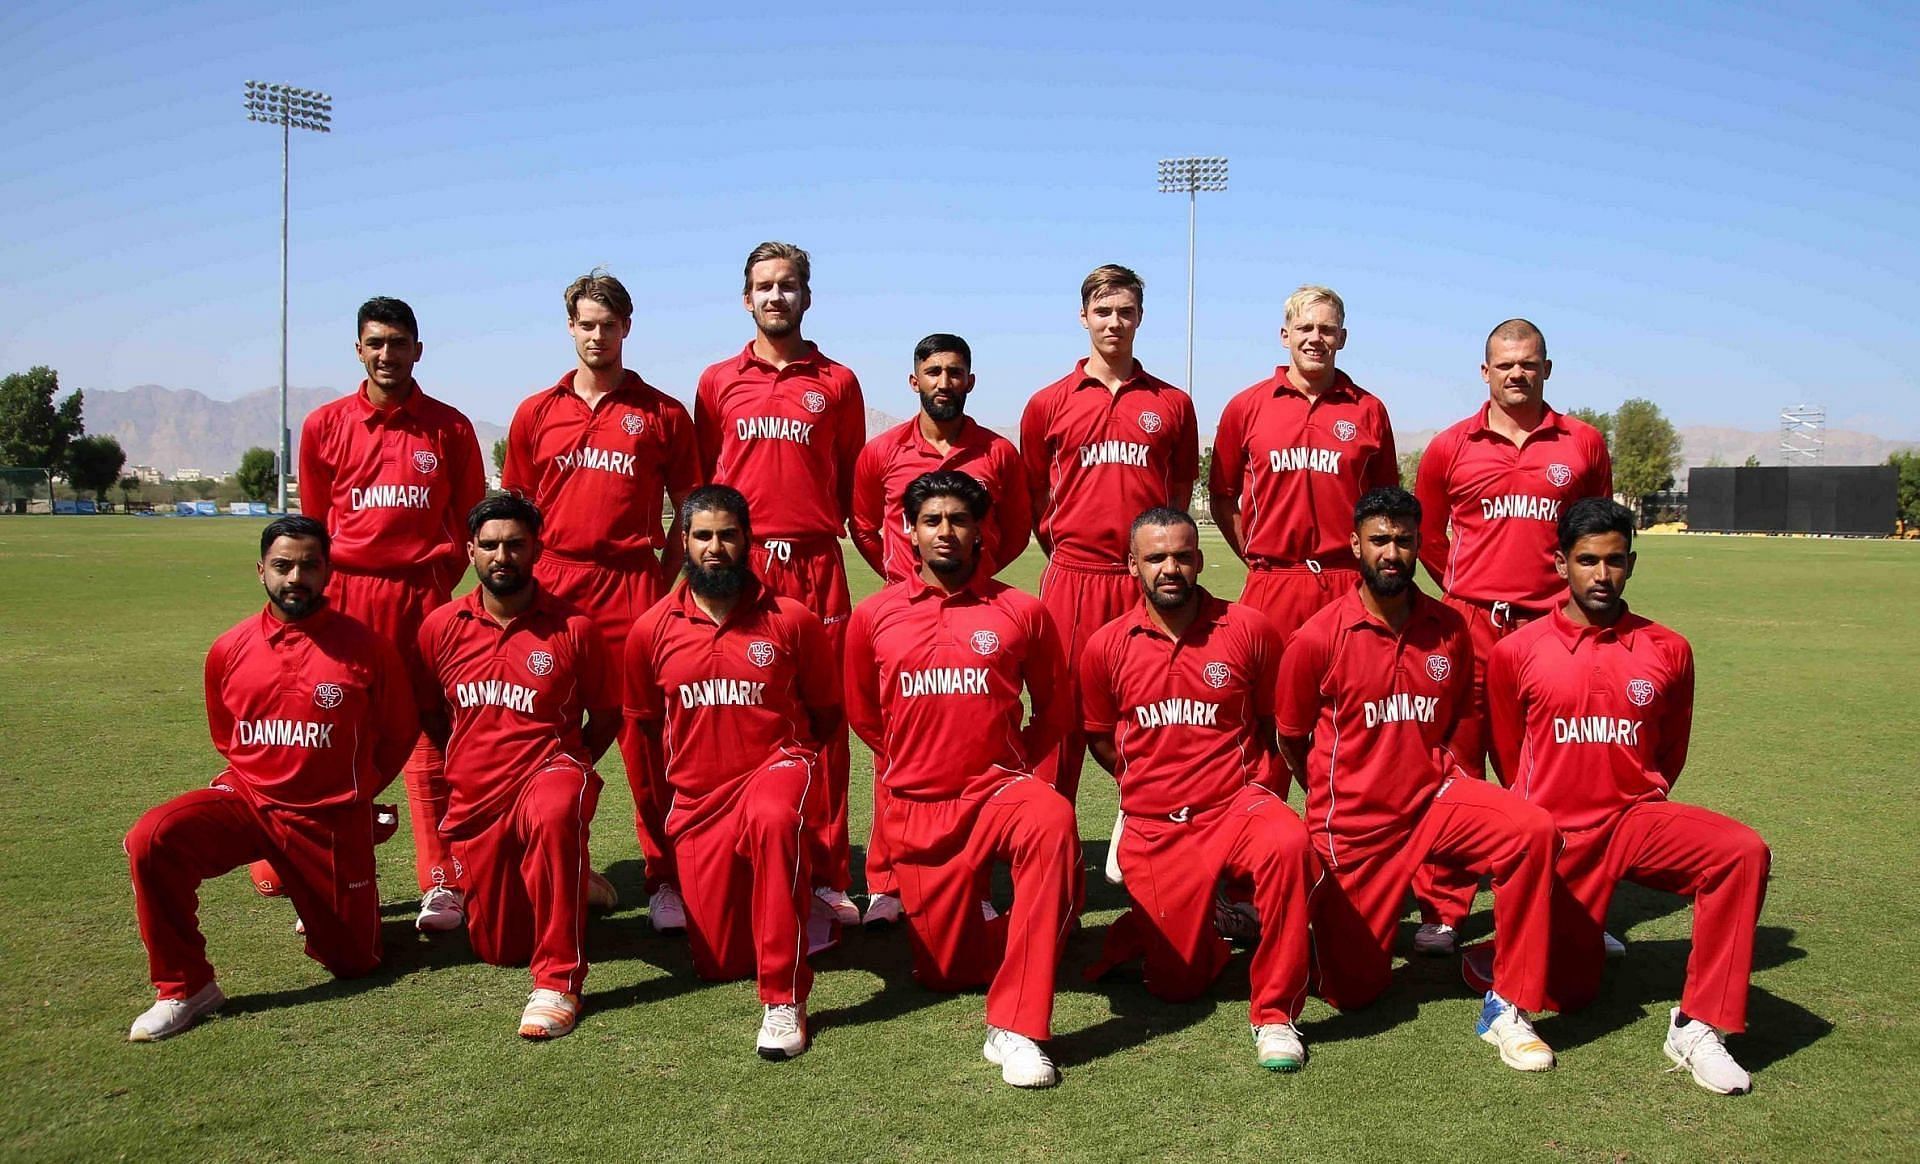 The Denmark side will be looking to clinch the series on Sunday